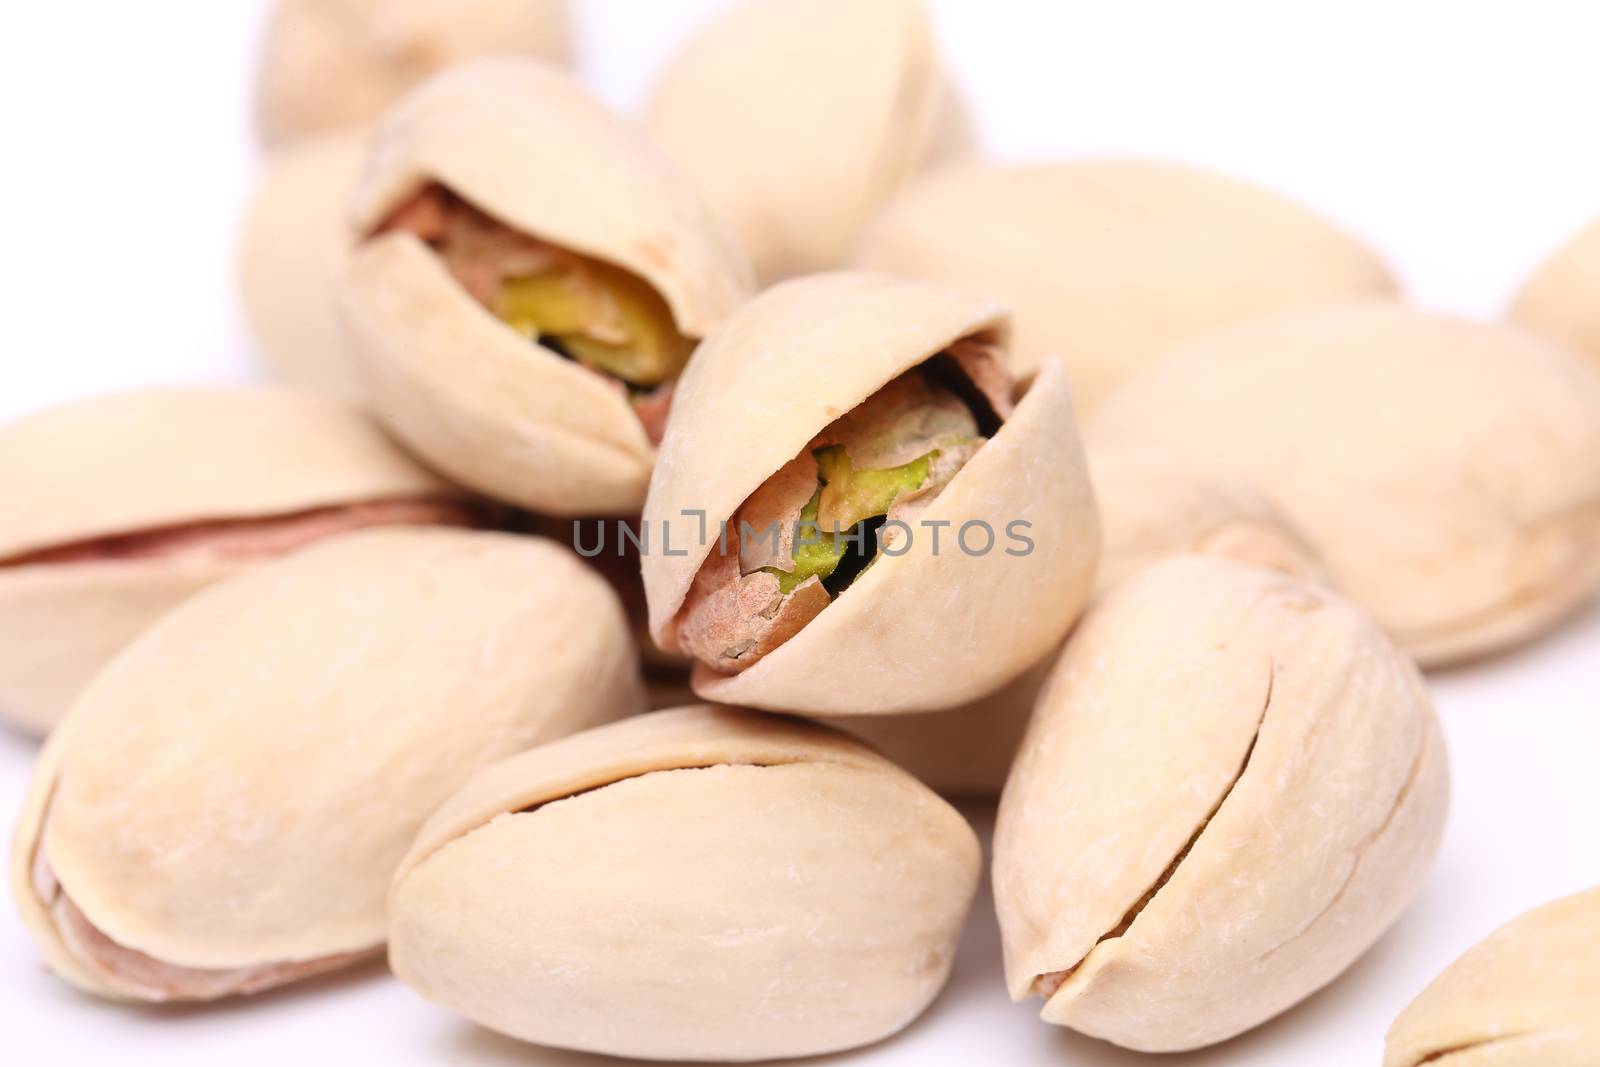 Large handful of pistachios by indigolotos